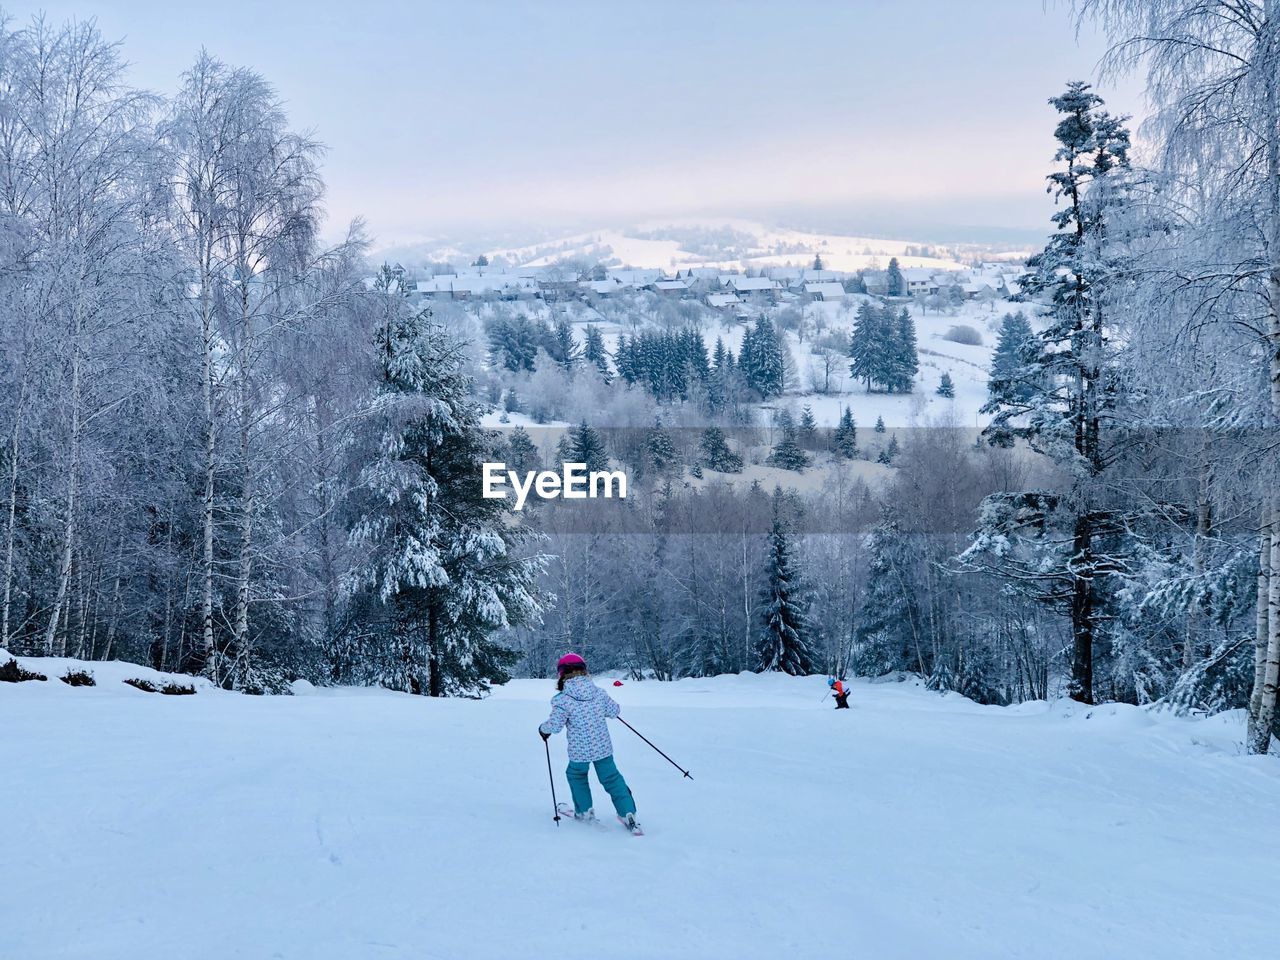 Skier going down the slope surrounded by coniferous forest and mountains covered in snow